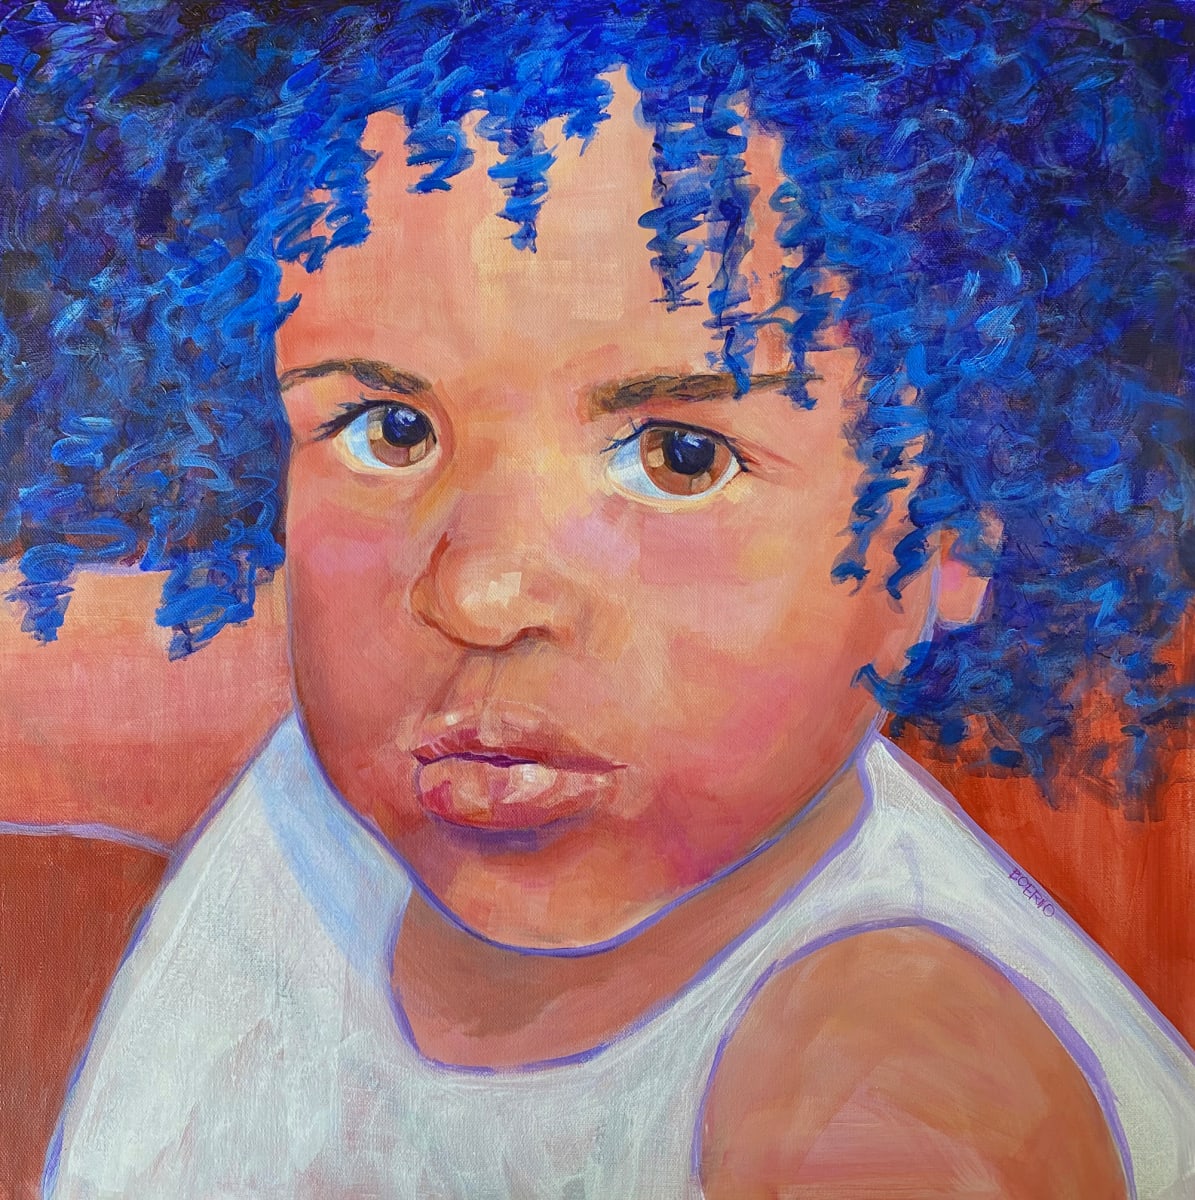 Seen (20x20") by Carrie Lacey Boerio  Image: "Seen" portrait of young girl by carrie lacey boerio